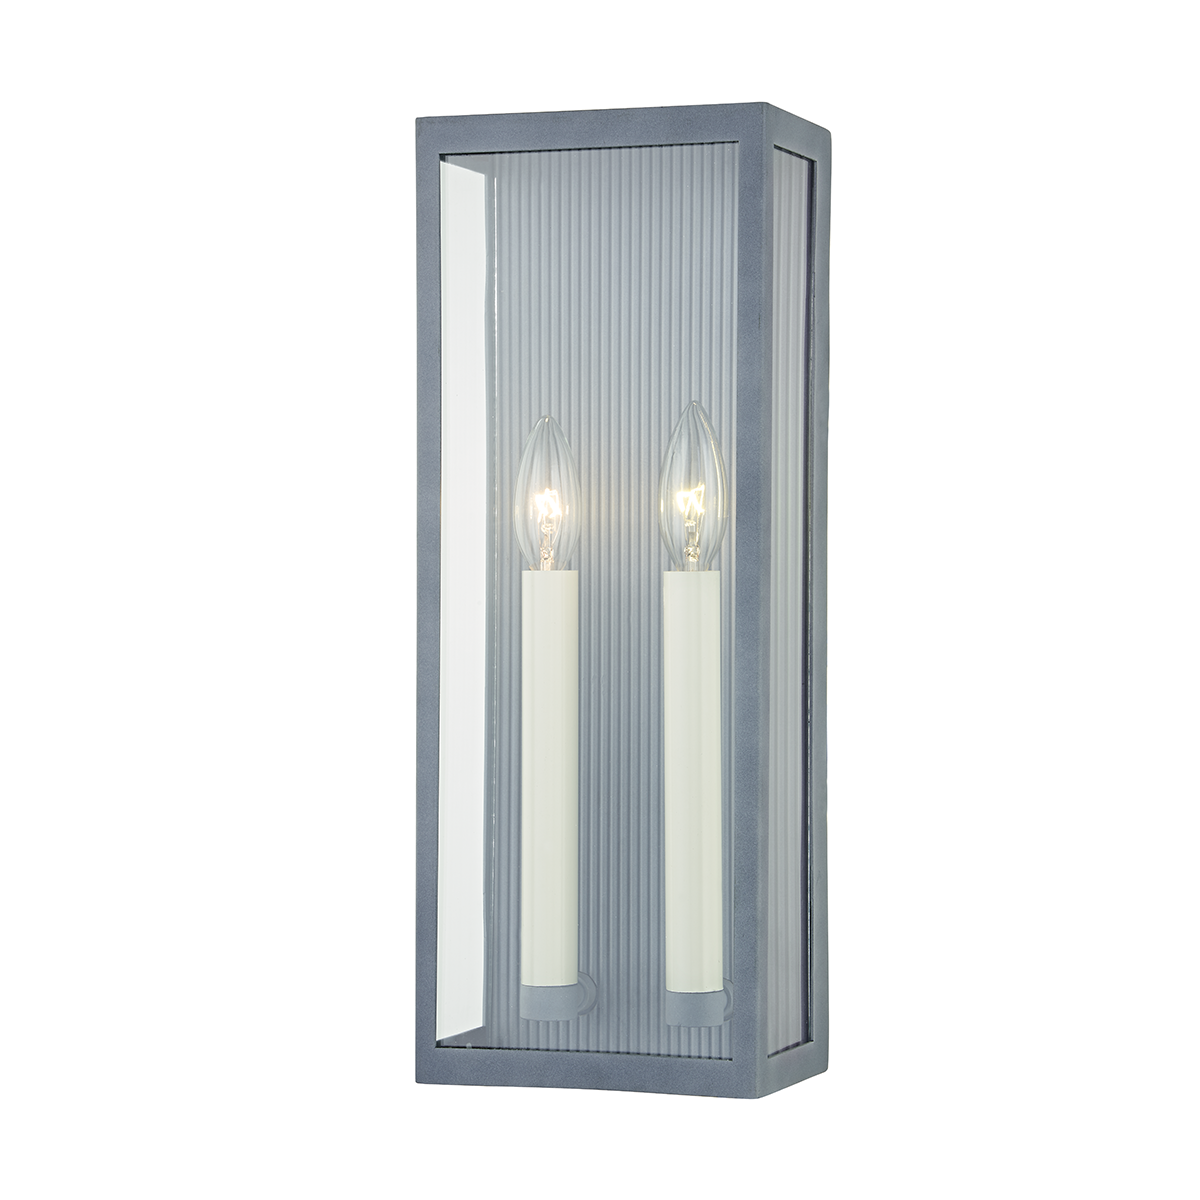 Troy Lighting 2 LIGHT EXTERIOR WALL SCONCE B1032 Outdoor l Wall Troy Lighting WEATHERED ZINC  